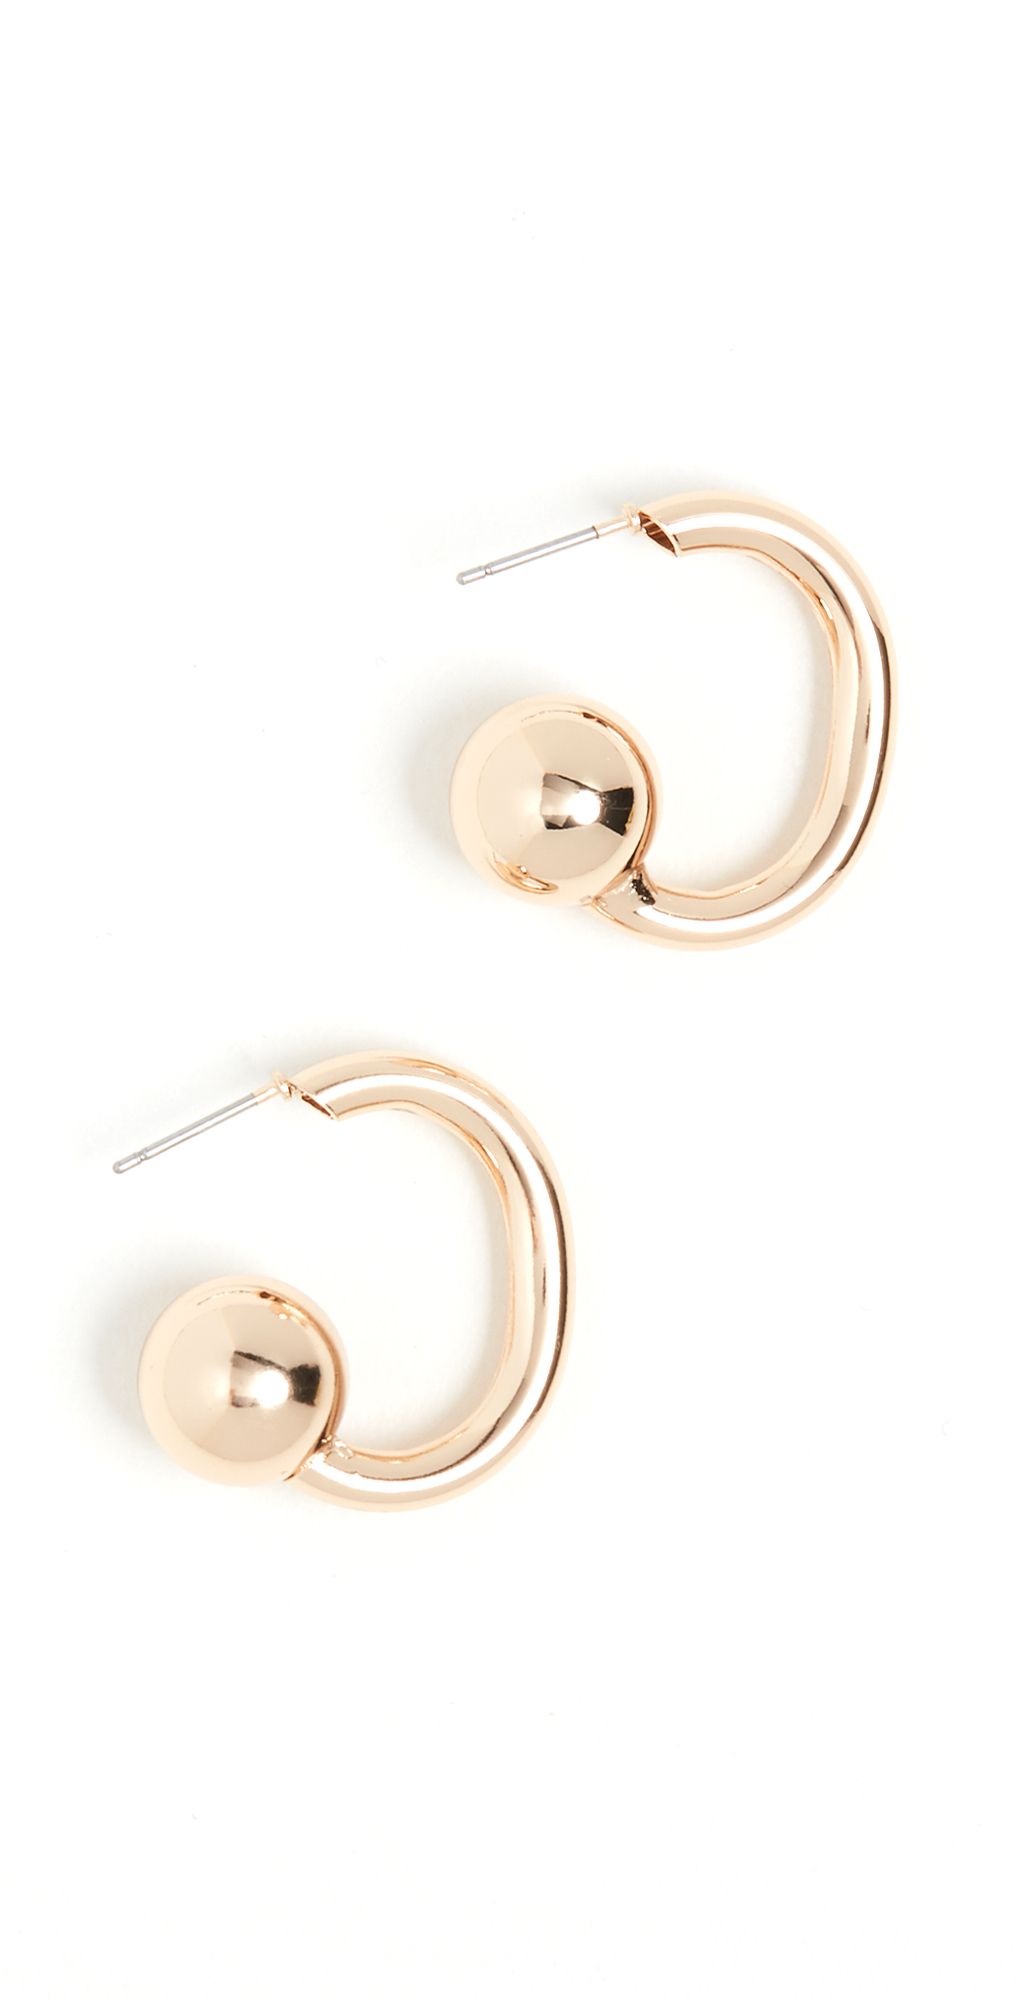 Kenneth Jay Lane 1 Gold Hoops with Ball End Post Earrings | Shopbop